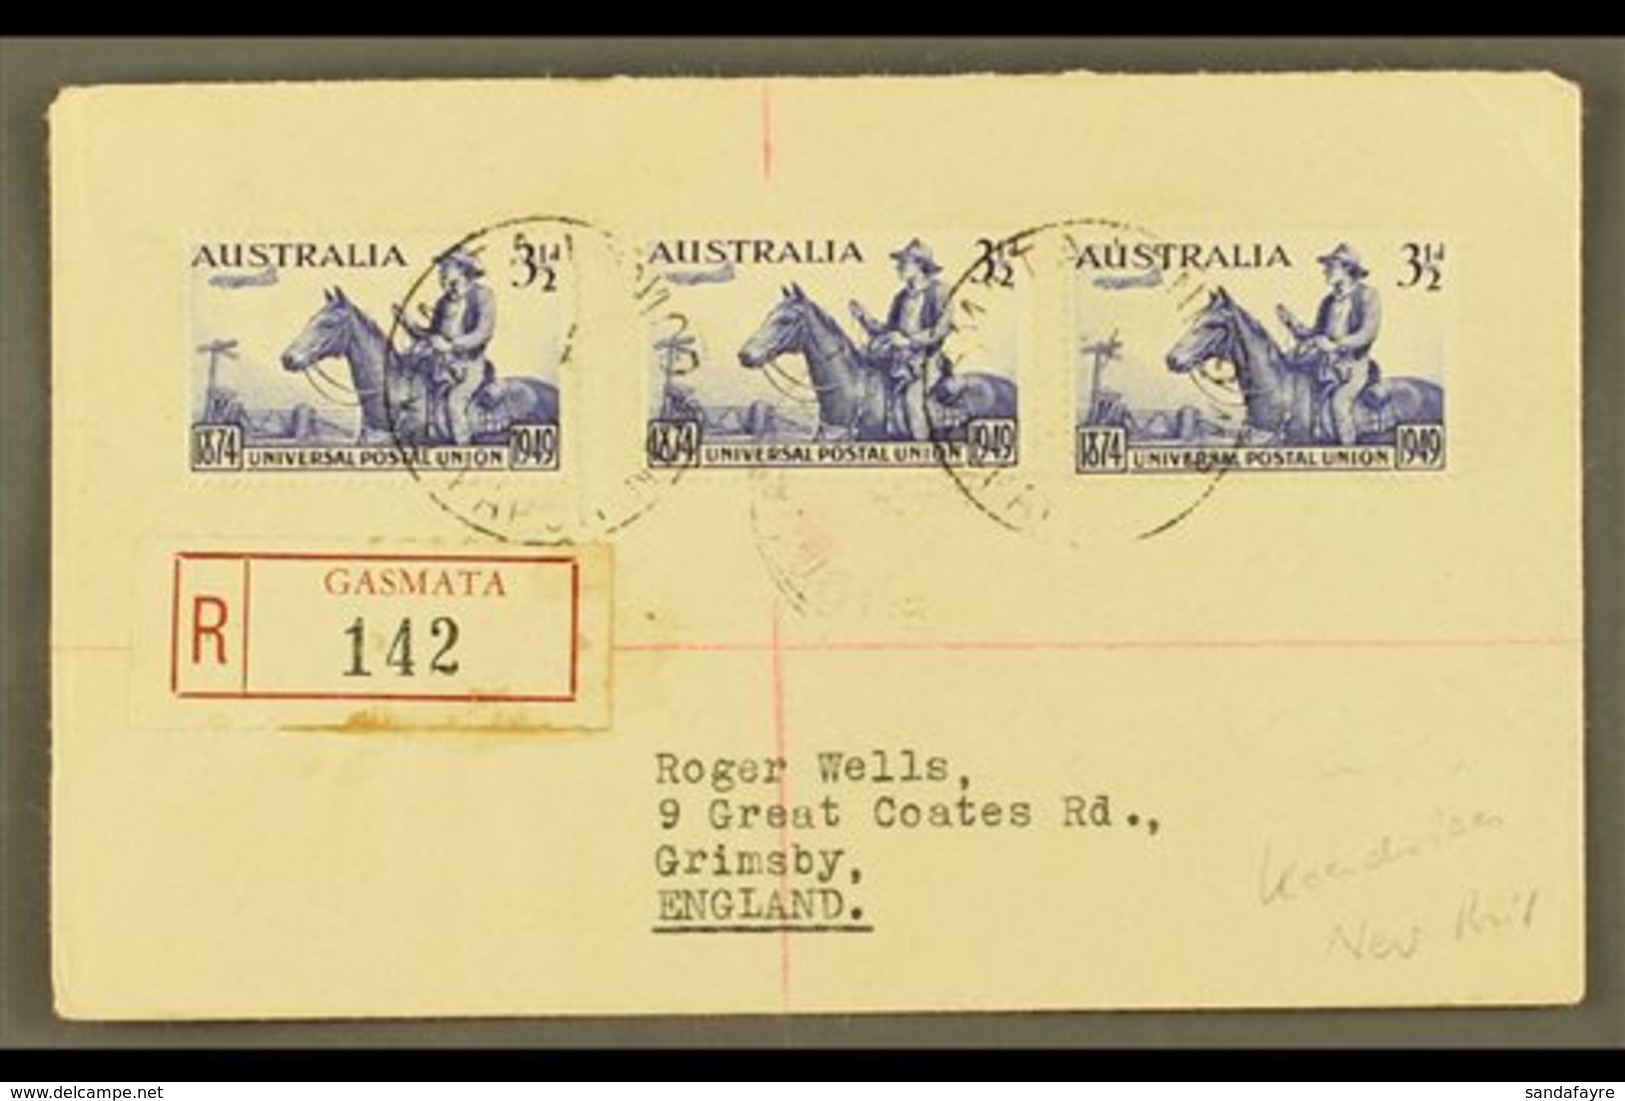 1950 (May) Neat "Roger Wells" Registered Cover To England, Bearing UPU 3½d X3, Tied GASMATA Cds's, Rabaul And Sydney Tra - Papua-Neuguinea